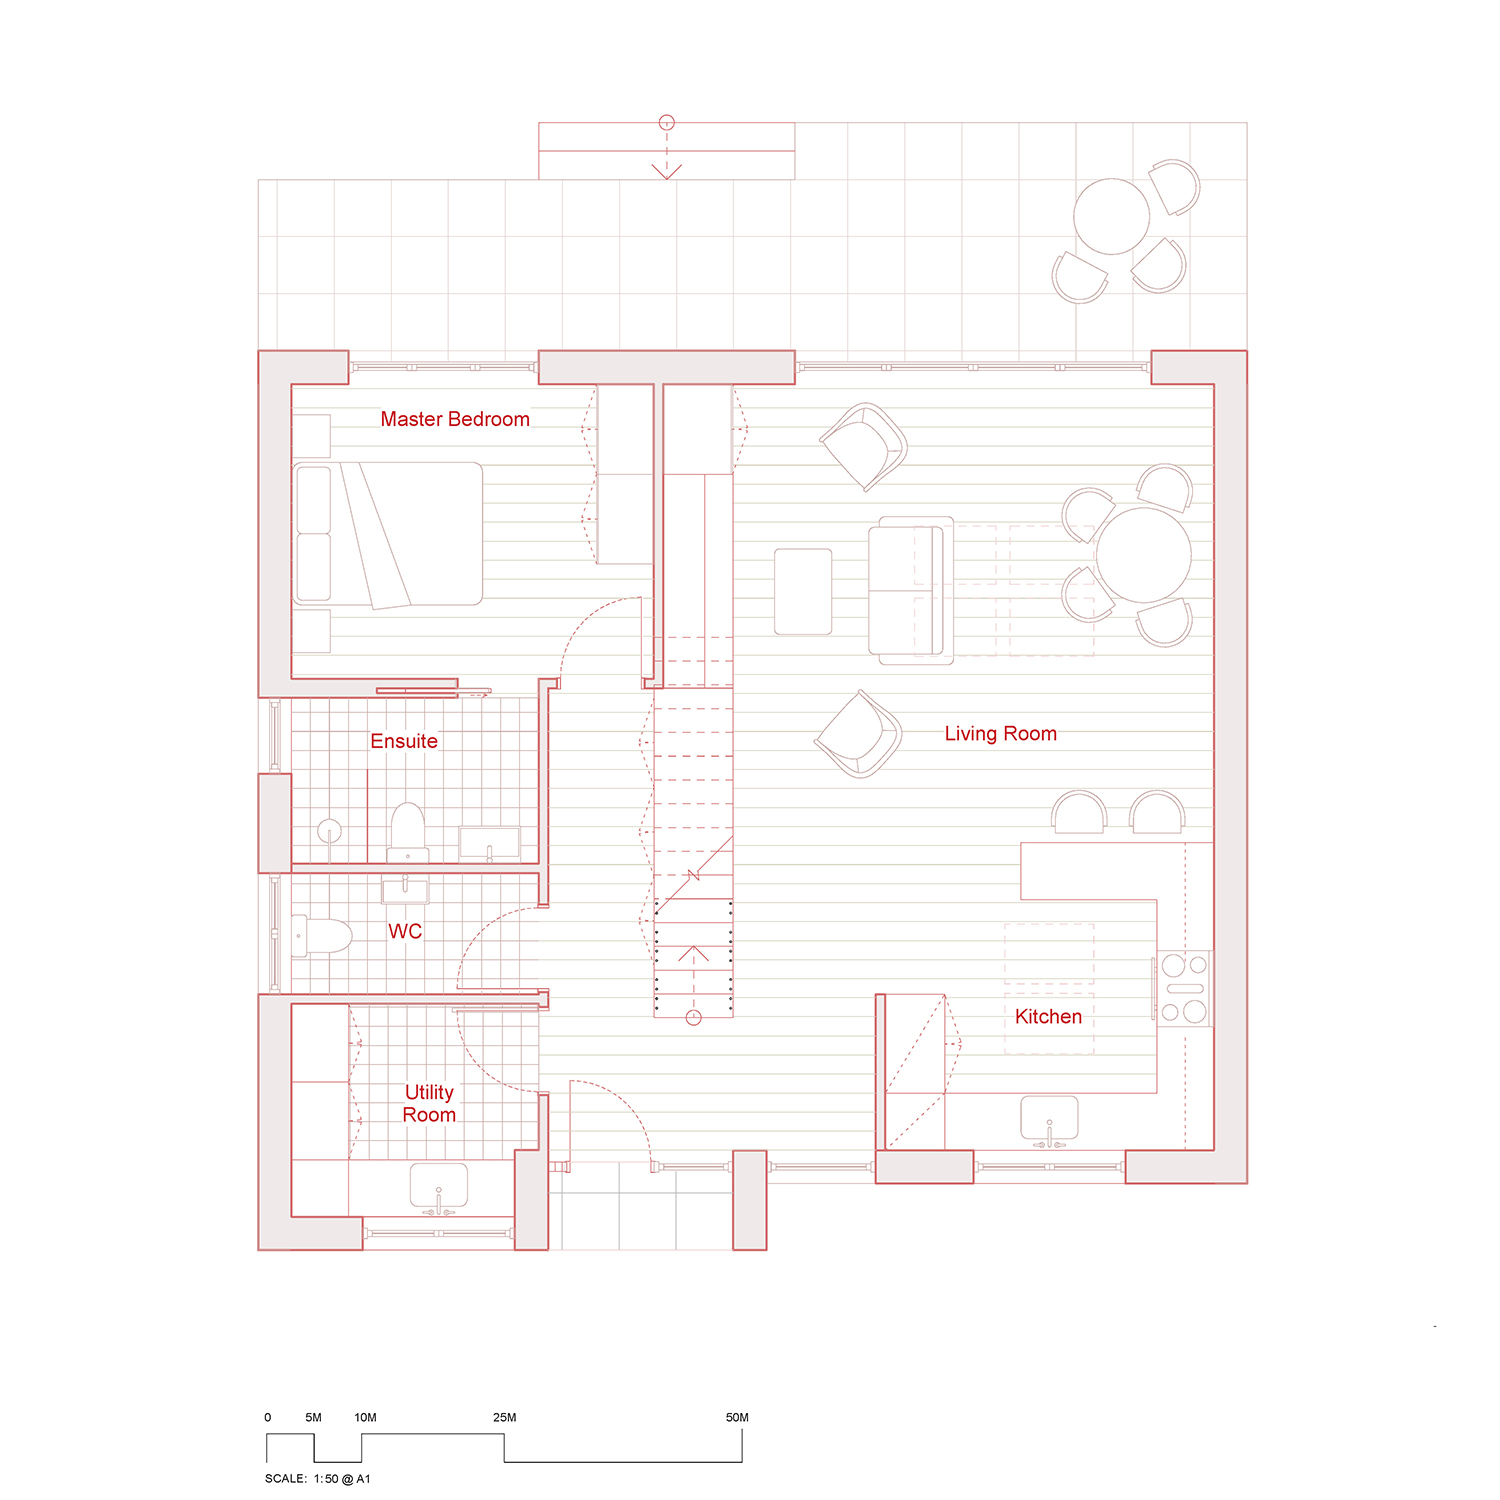 Plan showing Revit Template drawing in pink